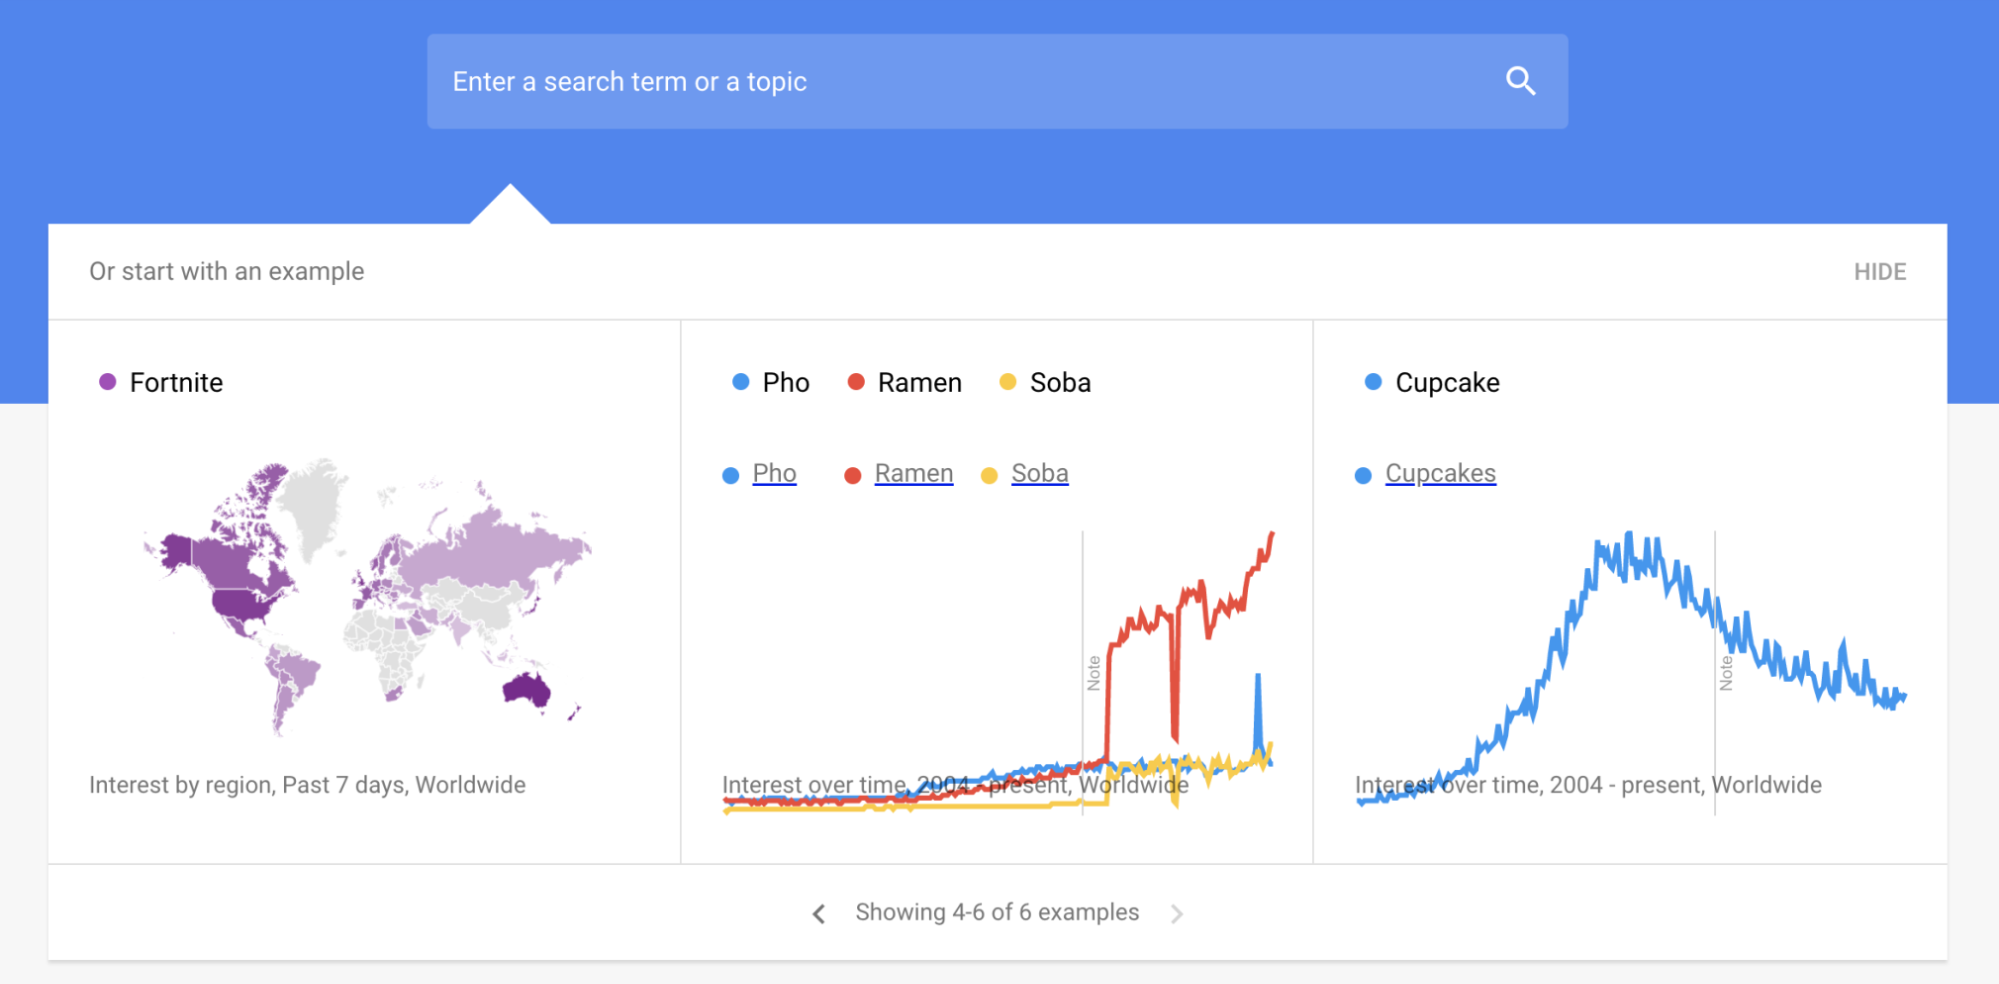 Discover new keywords and search trends